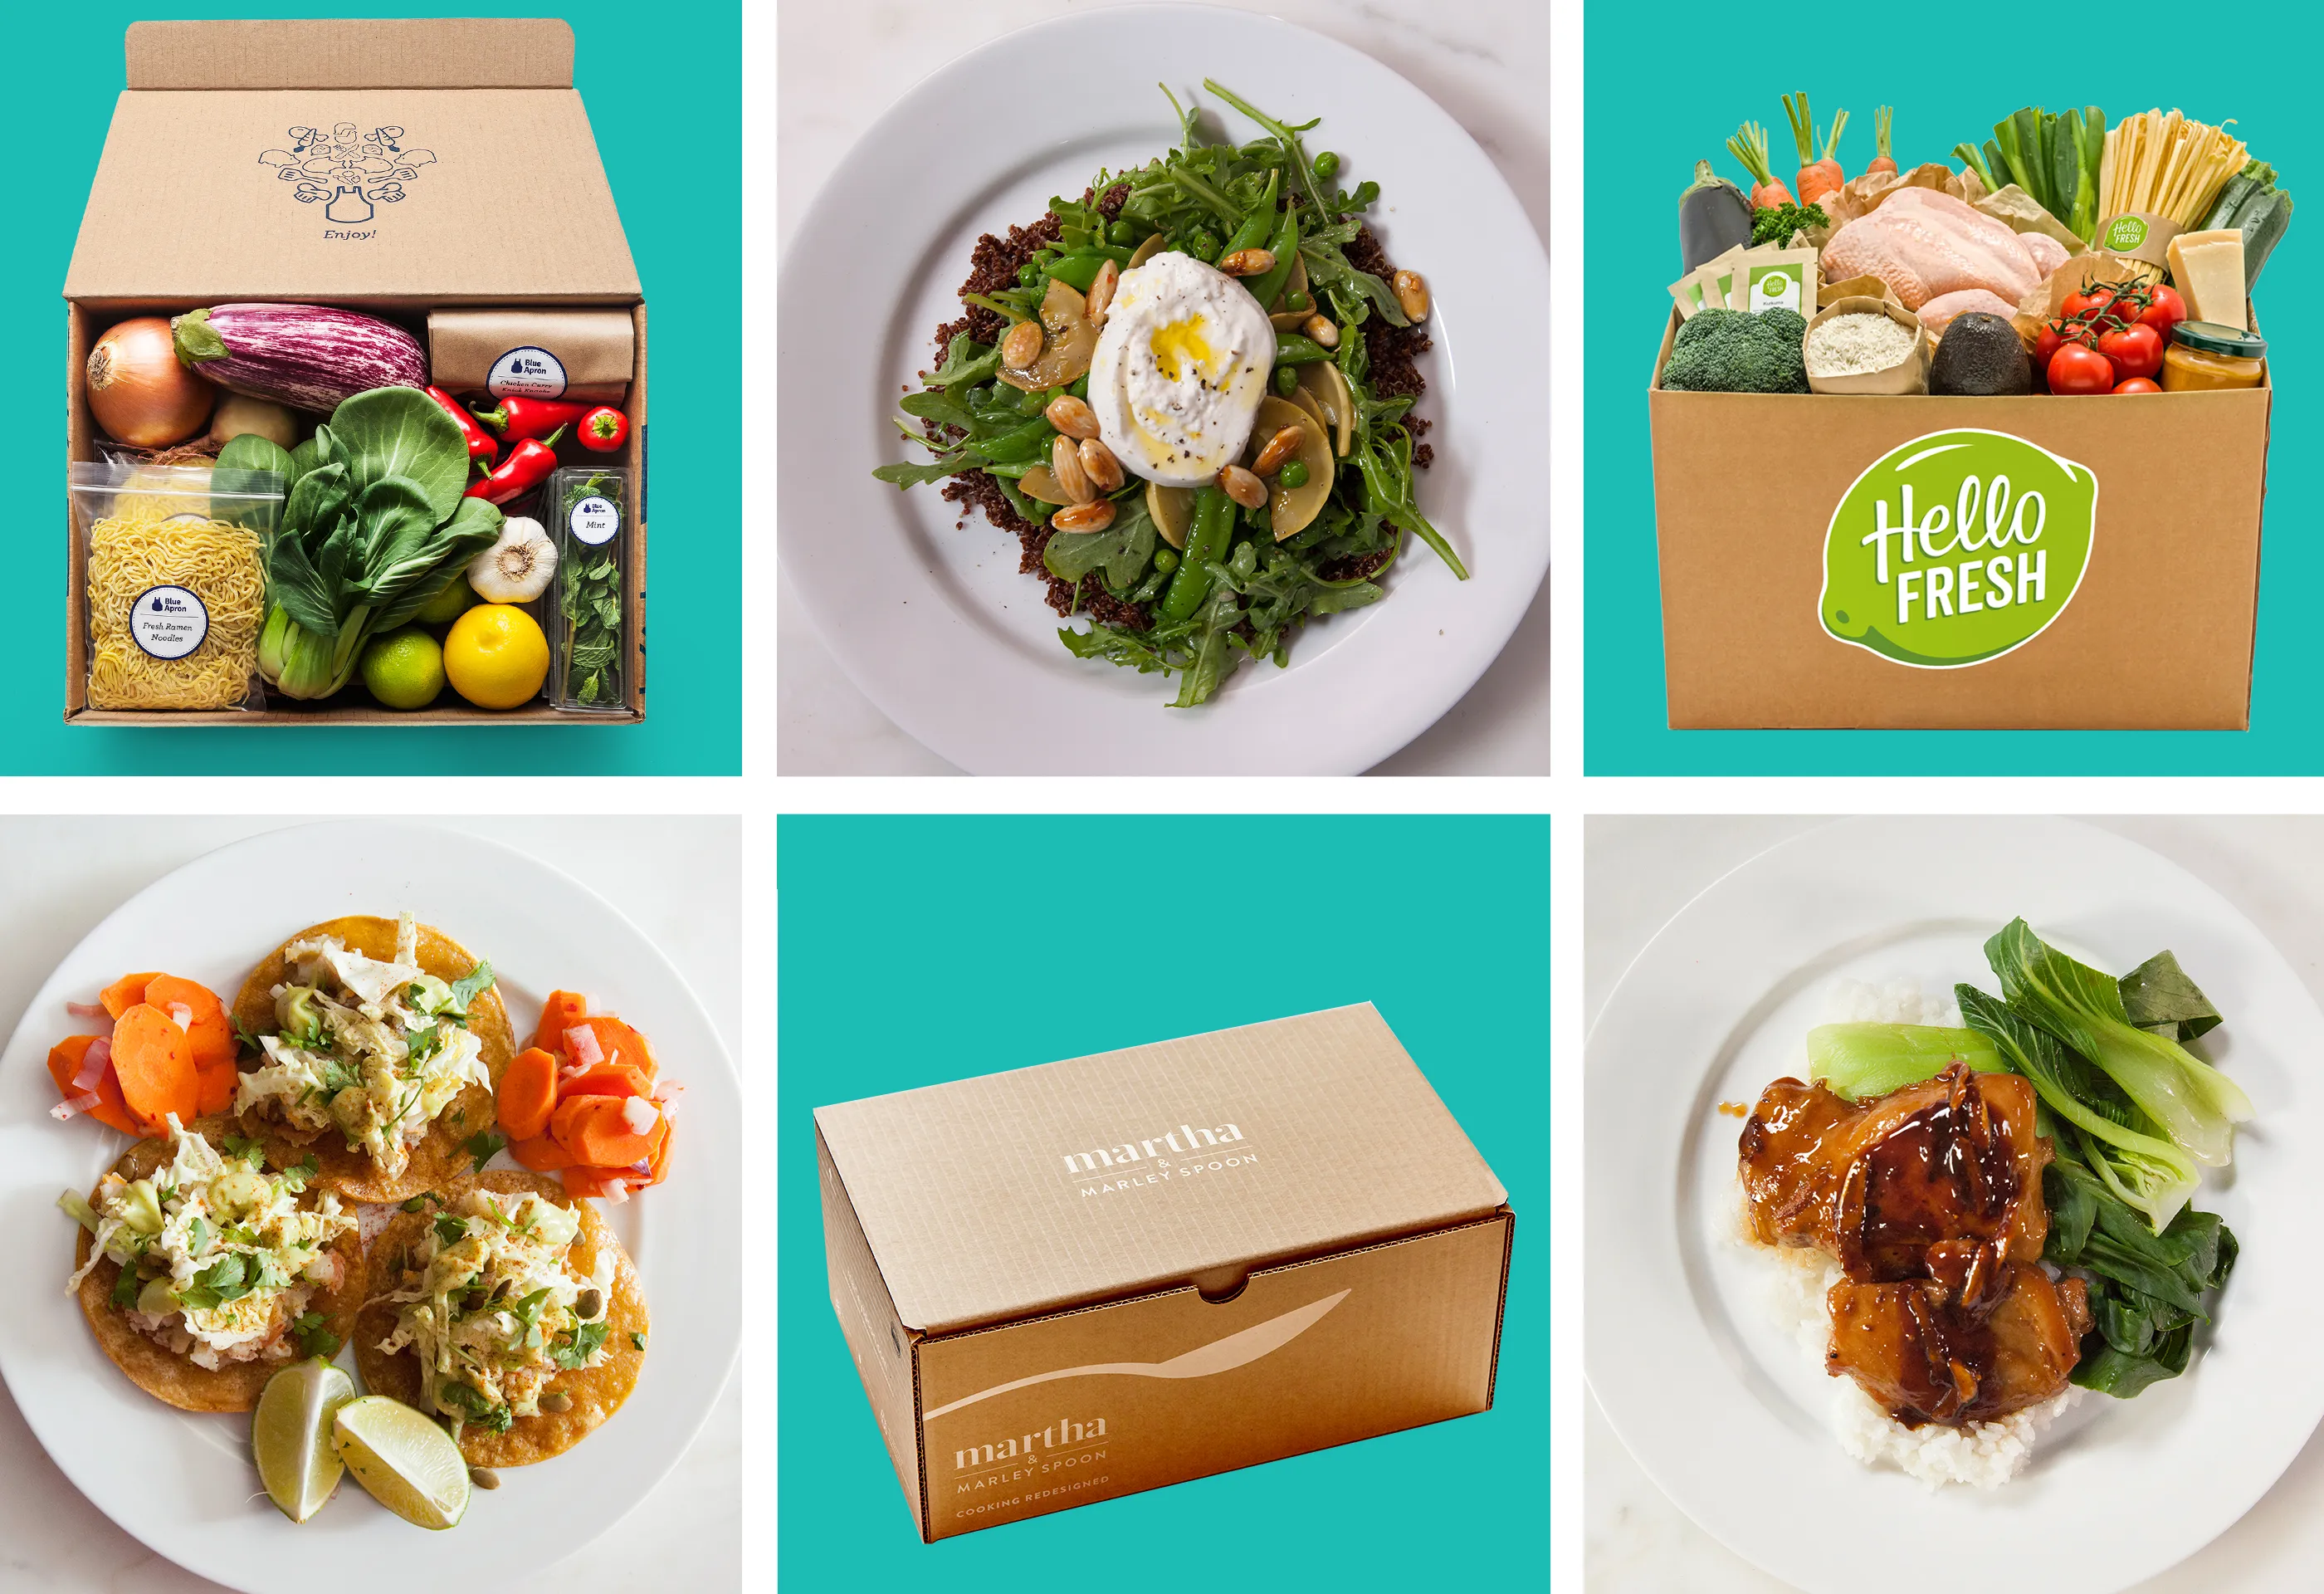 Blue Apron launches 1st meal kits made for meal prep